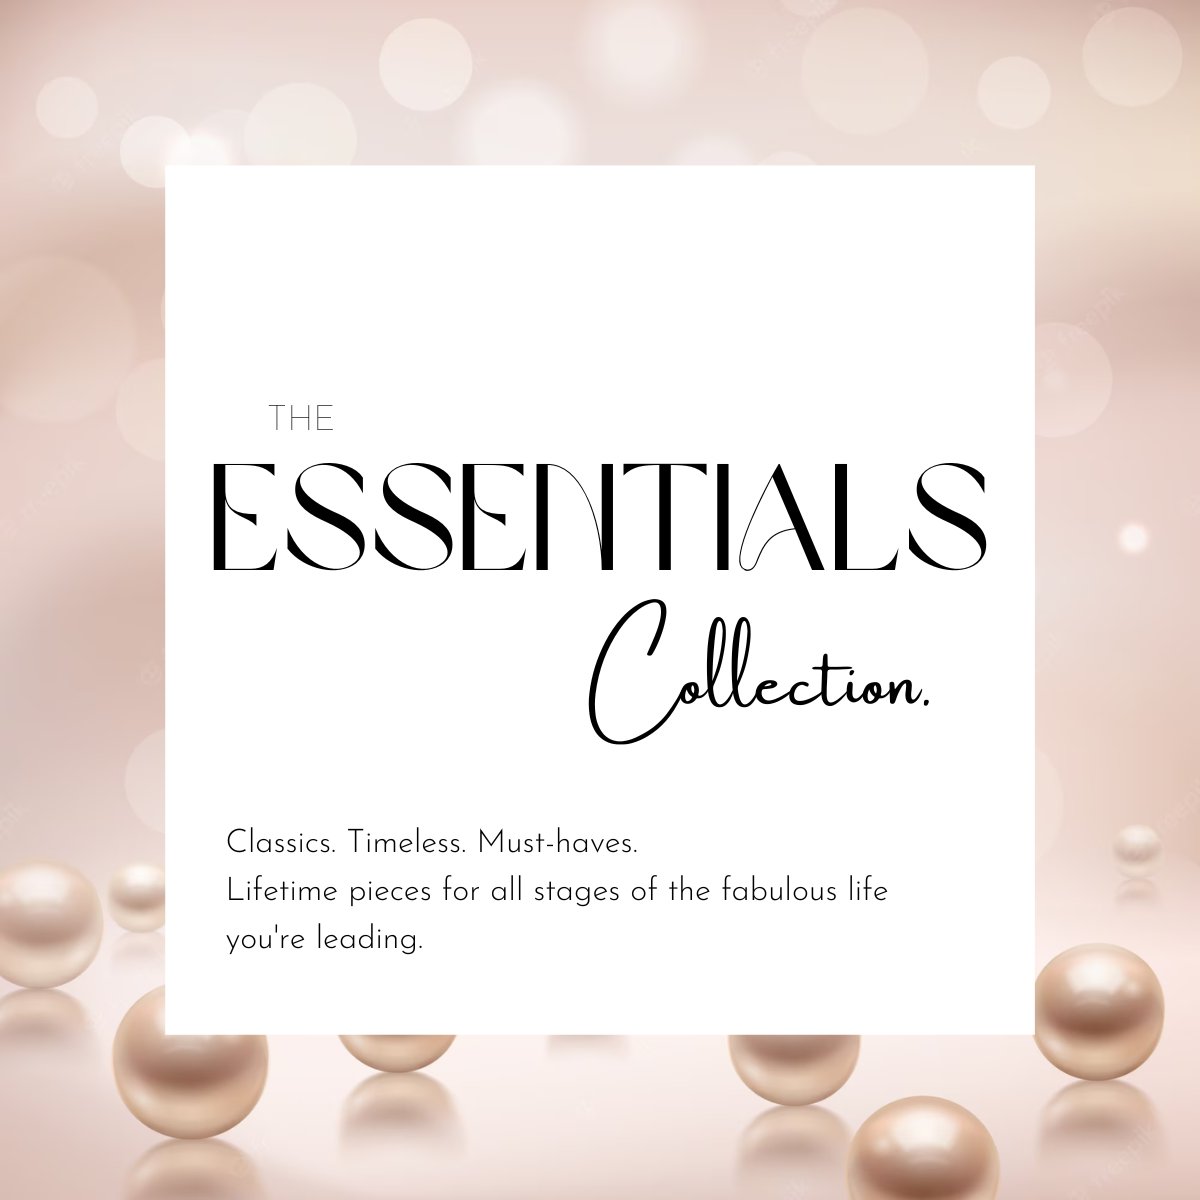 The Essentials Collection